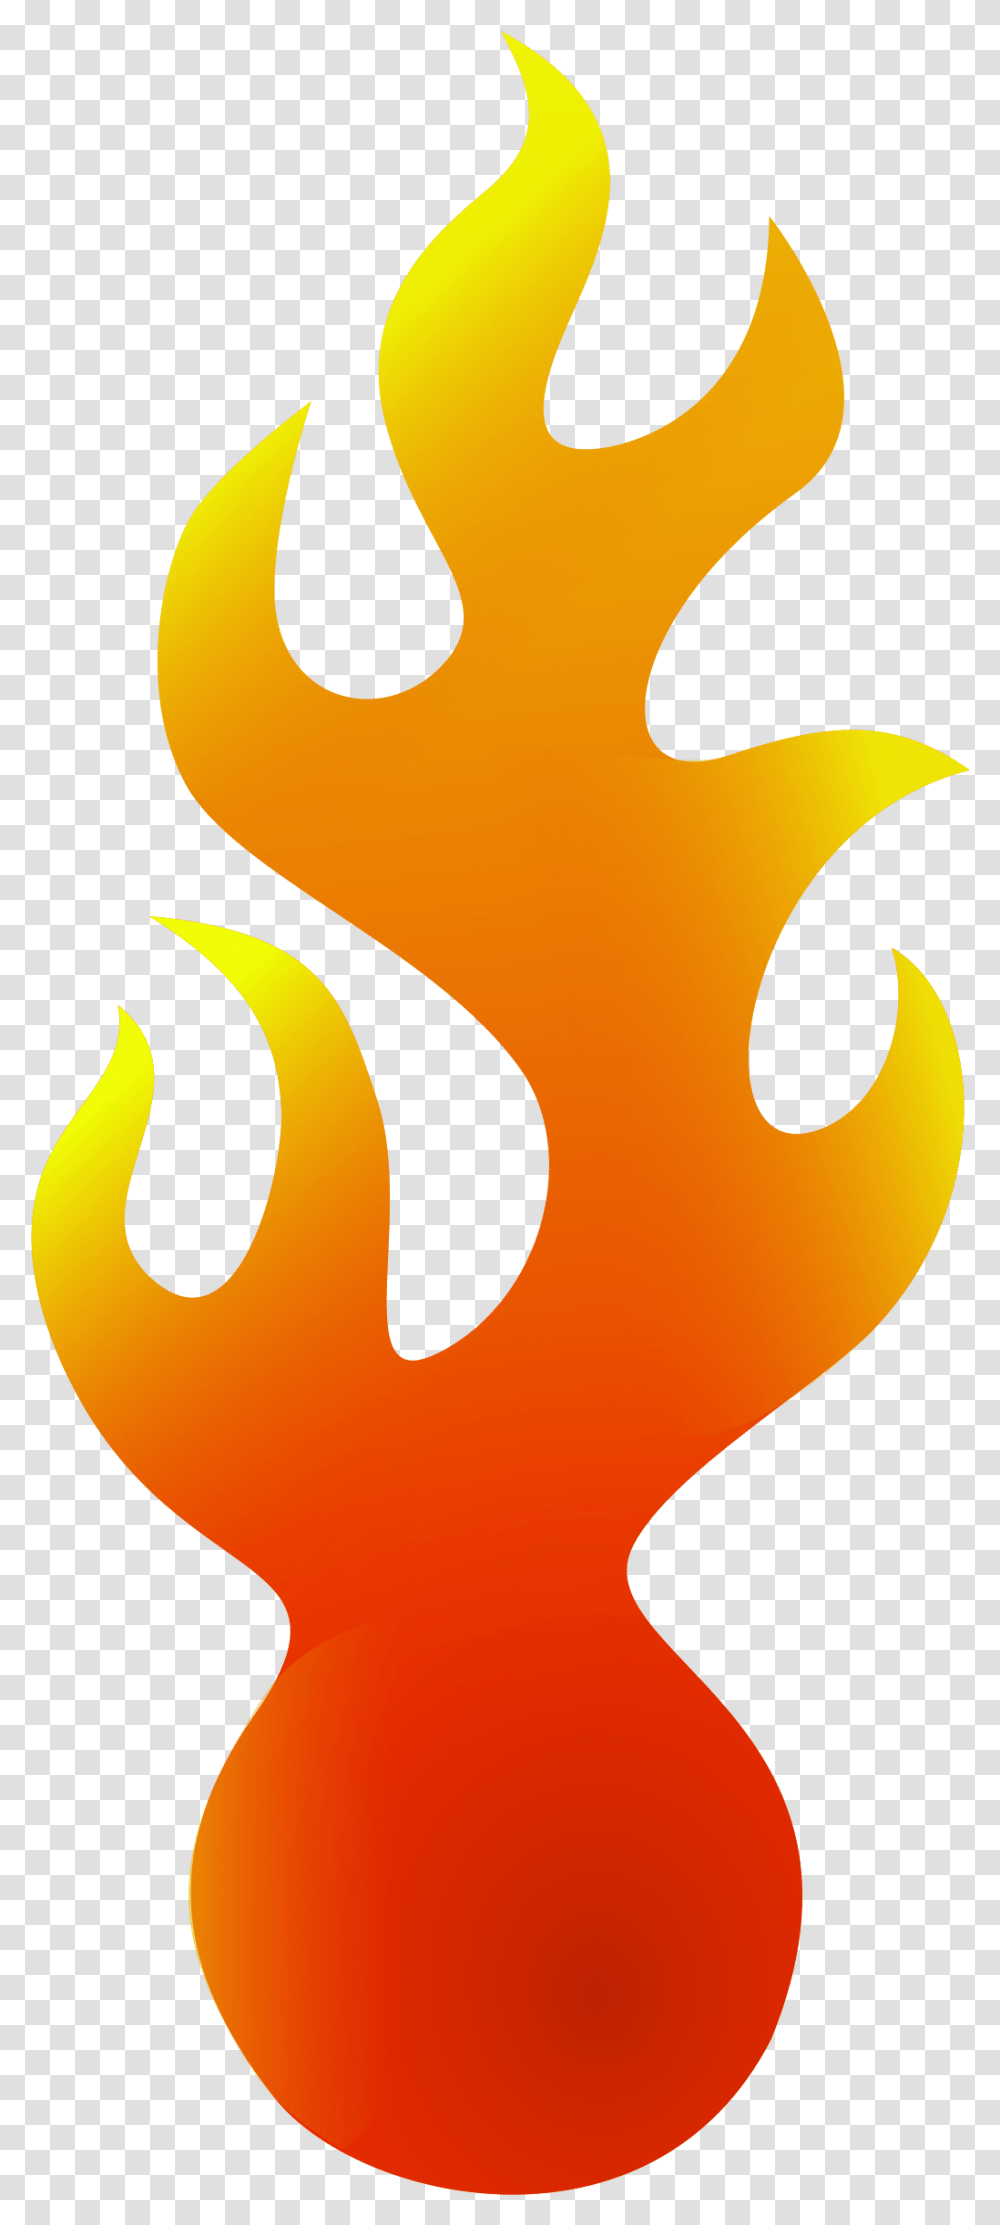 Images For Fire Clip Art Hot Wheels Flame Logo, Fire Hydrant, Leaf Transparent Png